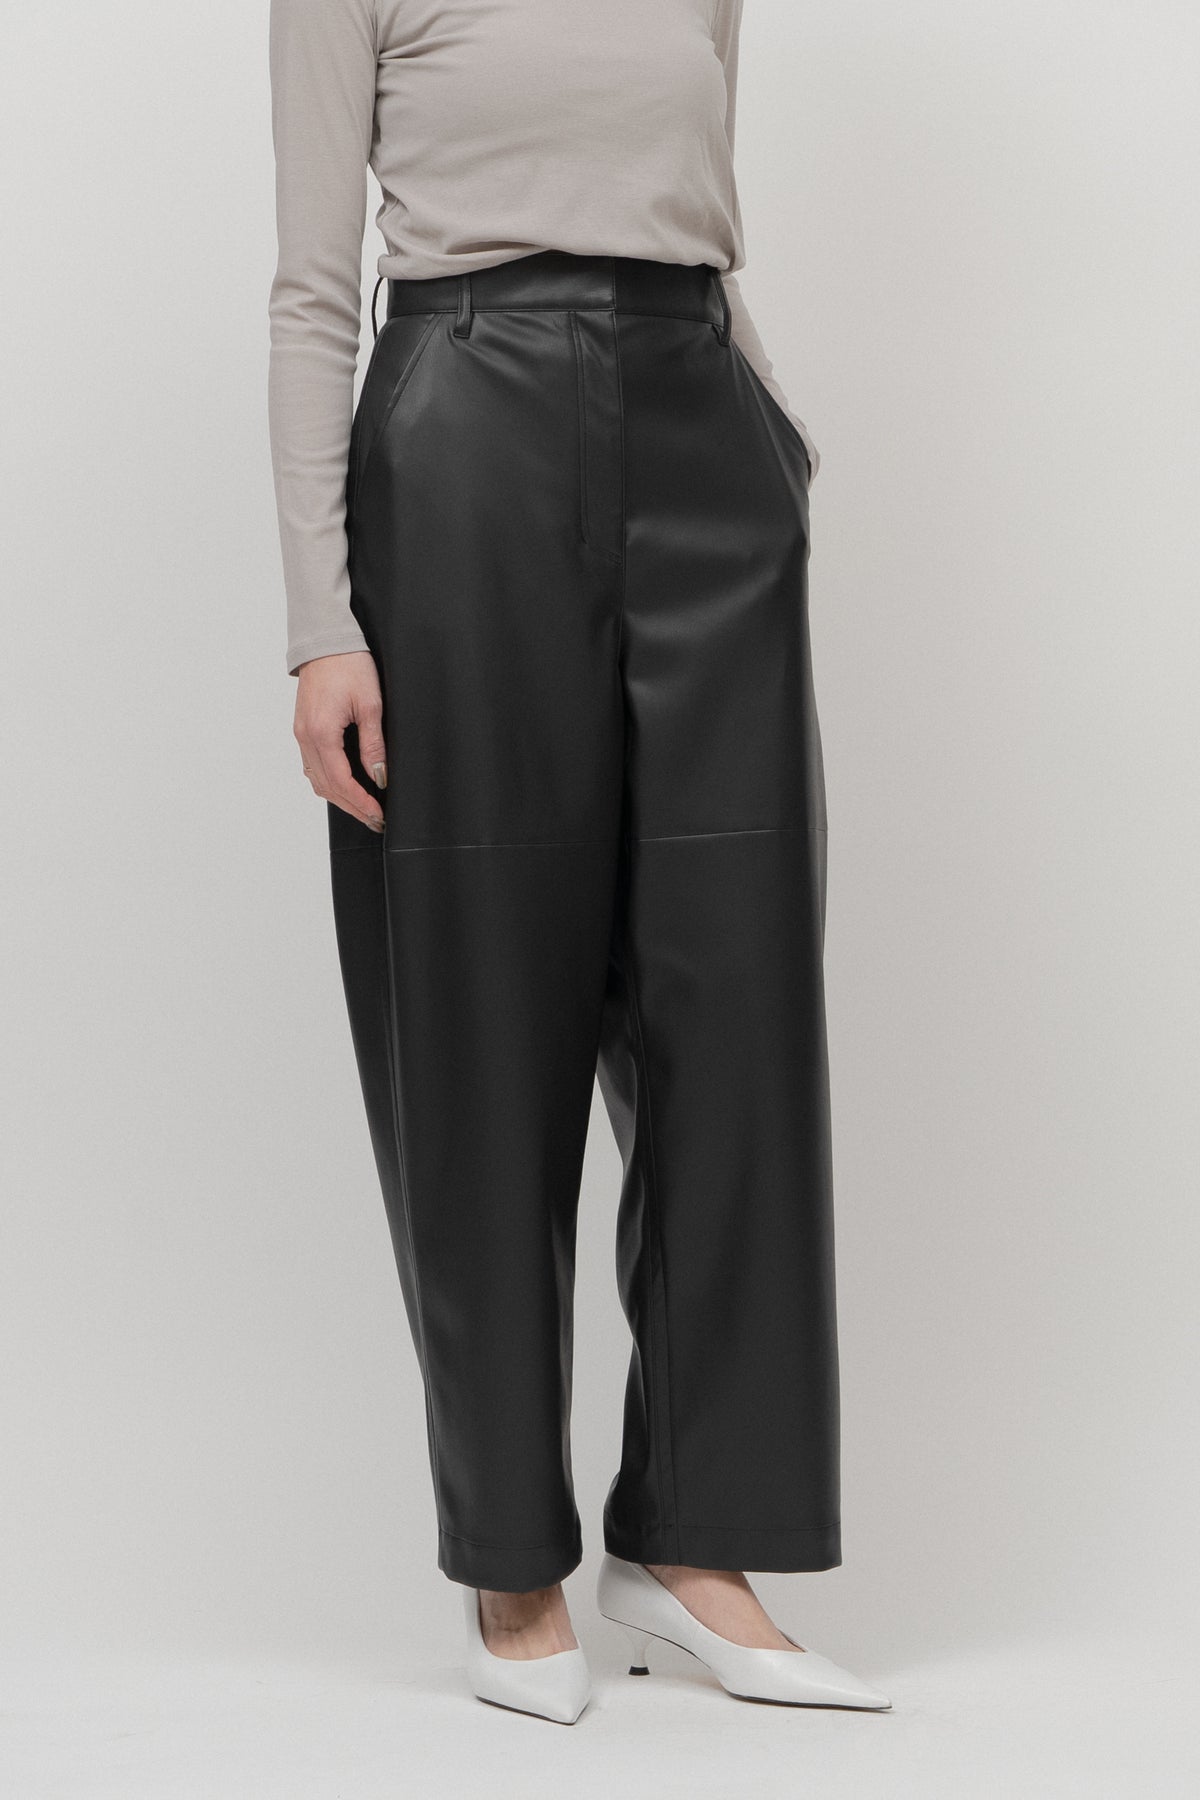 Synthetic leather Tapered pant_Black– IIROT